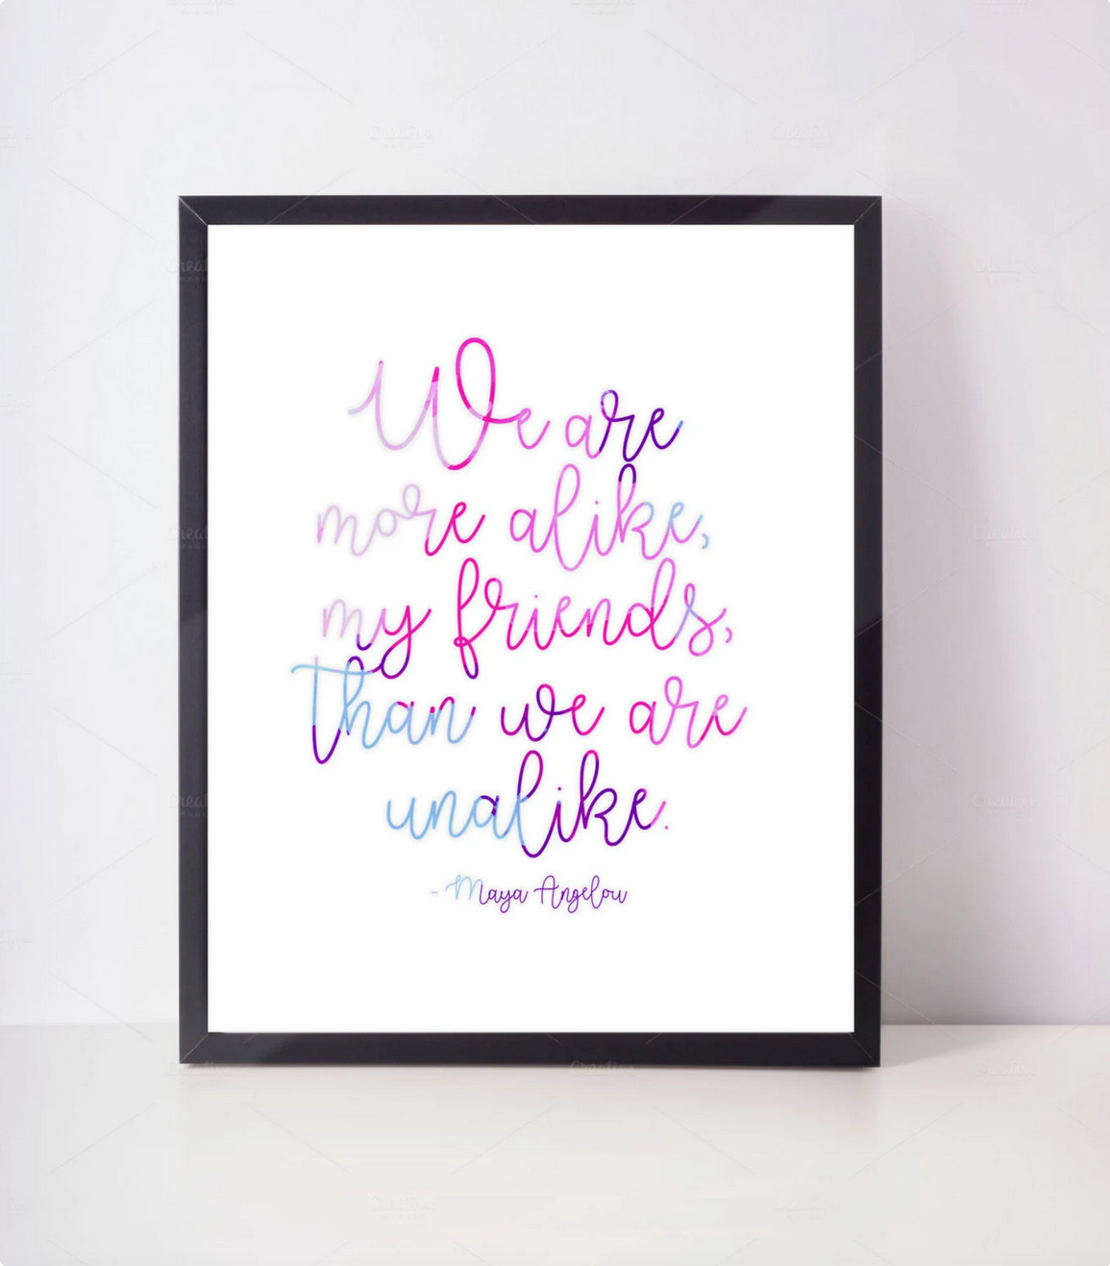 Print with the text "We are more alike, my friends, than we are unalike."